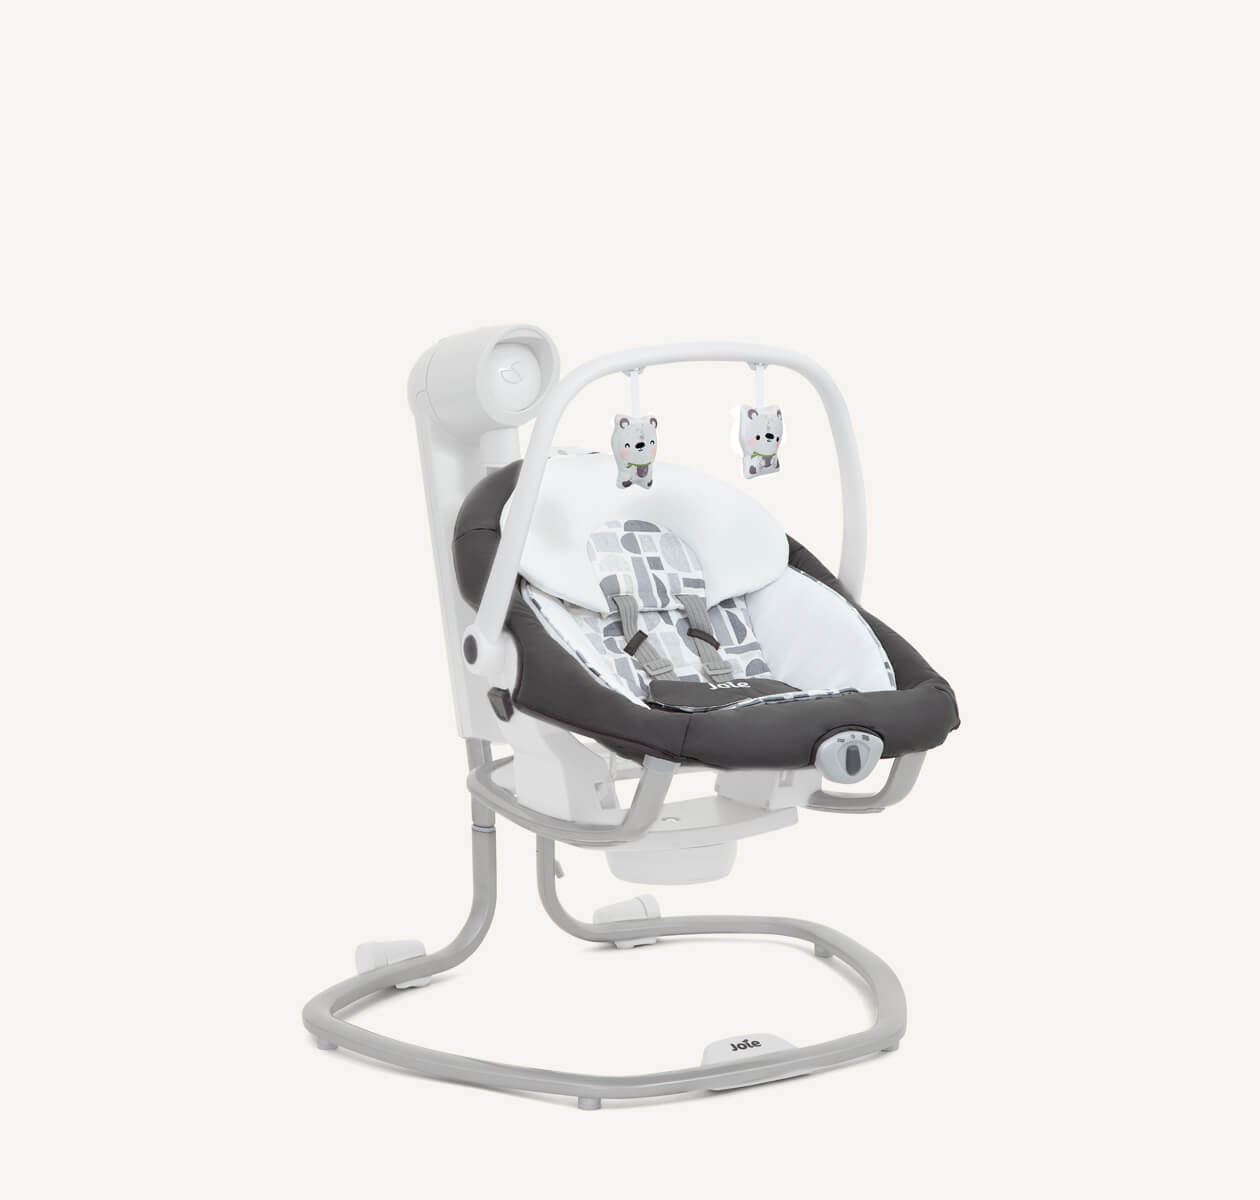 Dark gray and white patterned serina 2in1 Joie swing positioned at a right angle. 